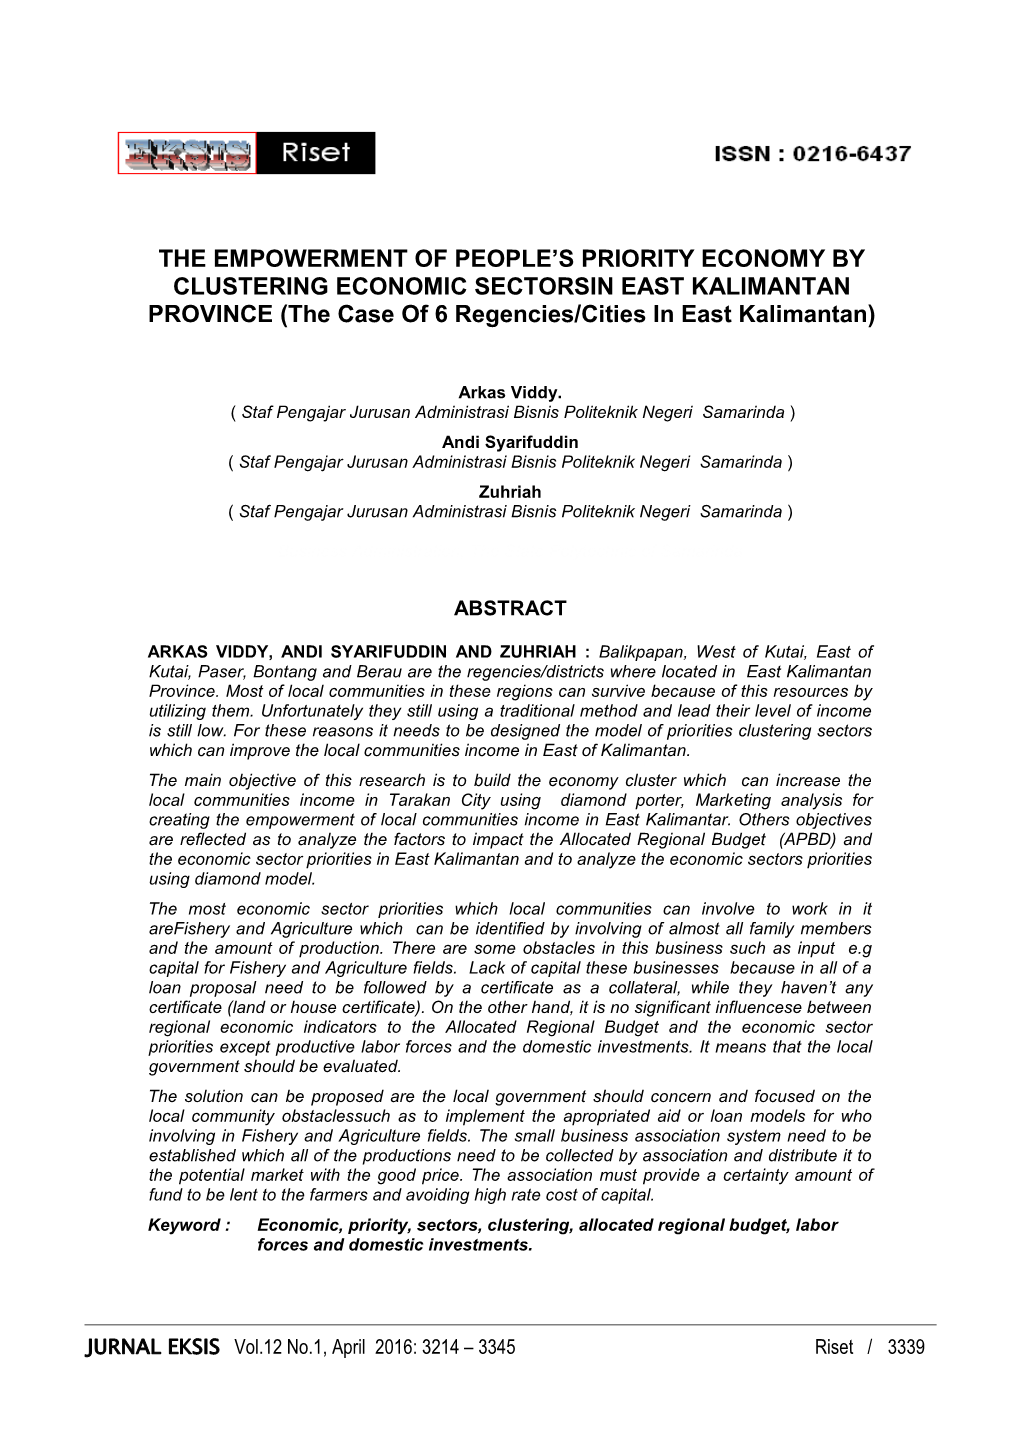 The Empowerment of People's Priority Economy By